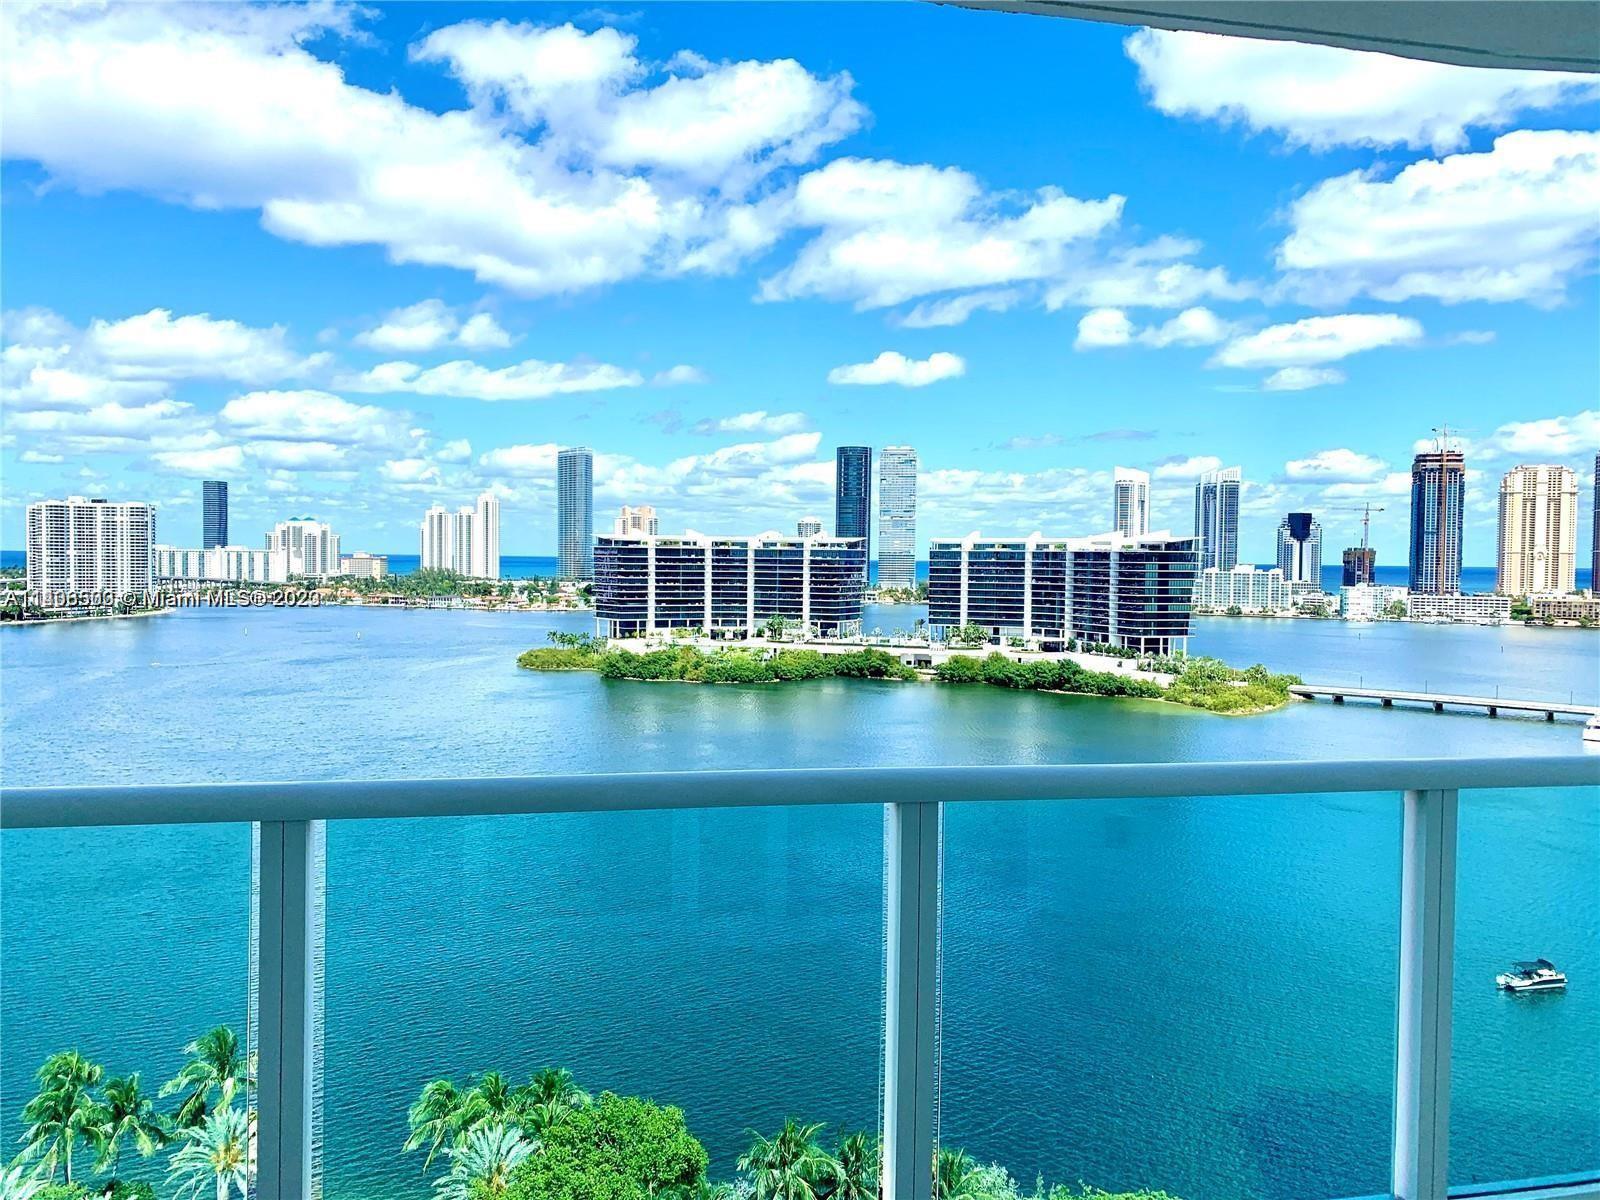 This stunning property Boasting a spacious layout of 4 bed and 4.5 baths,this fully furnished residence spans an impressive 3,464 sq ft.Upon entering, you'll be greeted by breathtaking views of the Intracoastal waterway, the sparkling ocean, and the vibrant city skyline.In addition to the luxurious living spaces, this property includes a media room, perfect for entertainment and relaxation. Peninsula 2 offers outstanding amenities, including two swimming pools, tennis courts, and a well-equipped gym, ensuring a lifestyle of comfort and convenience.
Nestled within a gated community, this residence provides a sense of security and tranquility. Its prime location places you in the heart of Aventura, renowned for its upscale shopping, dining, and entertainment options.